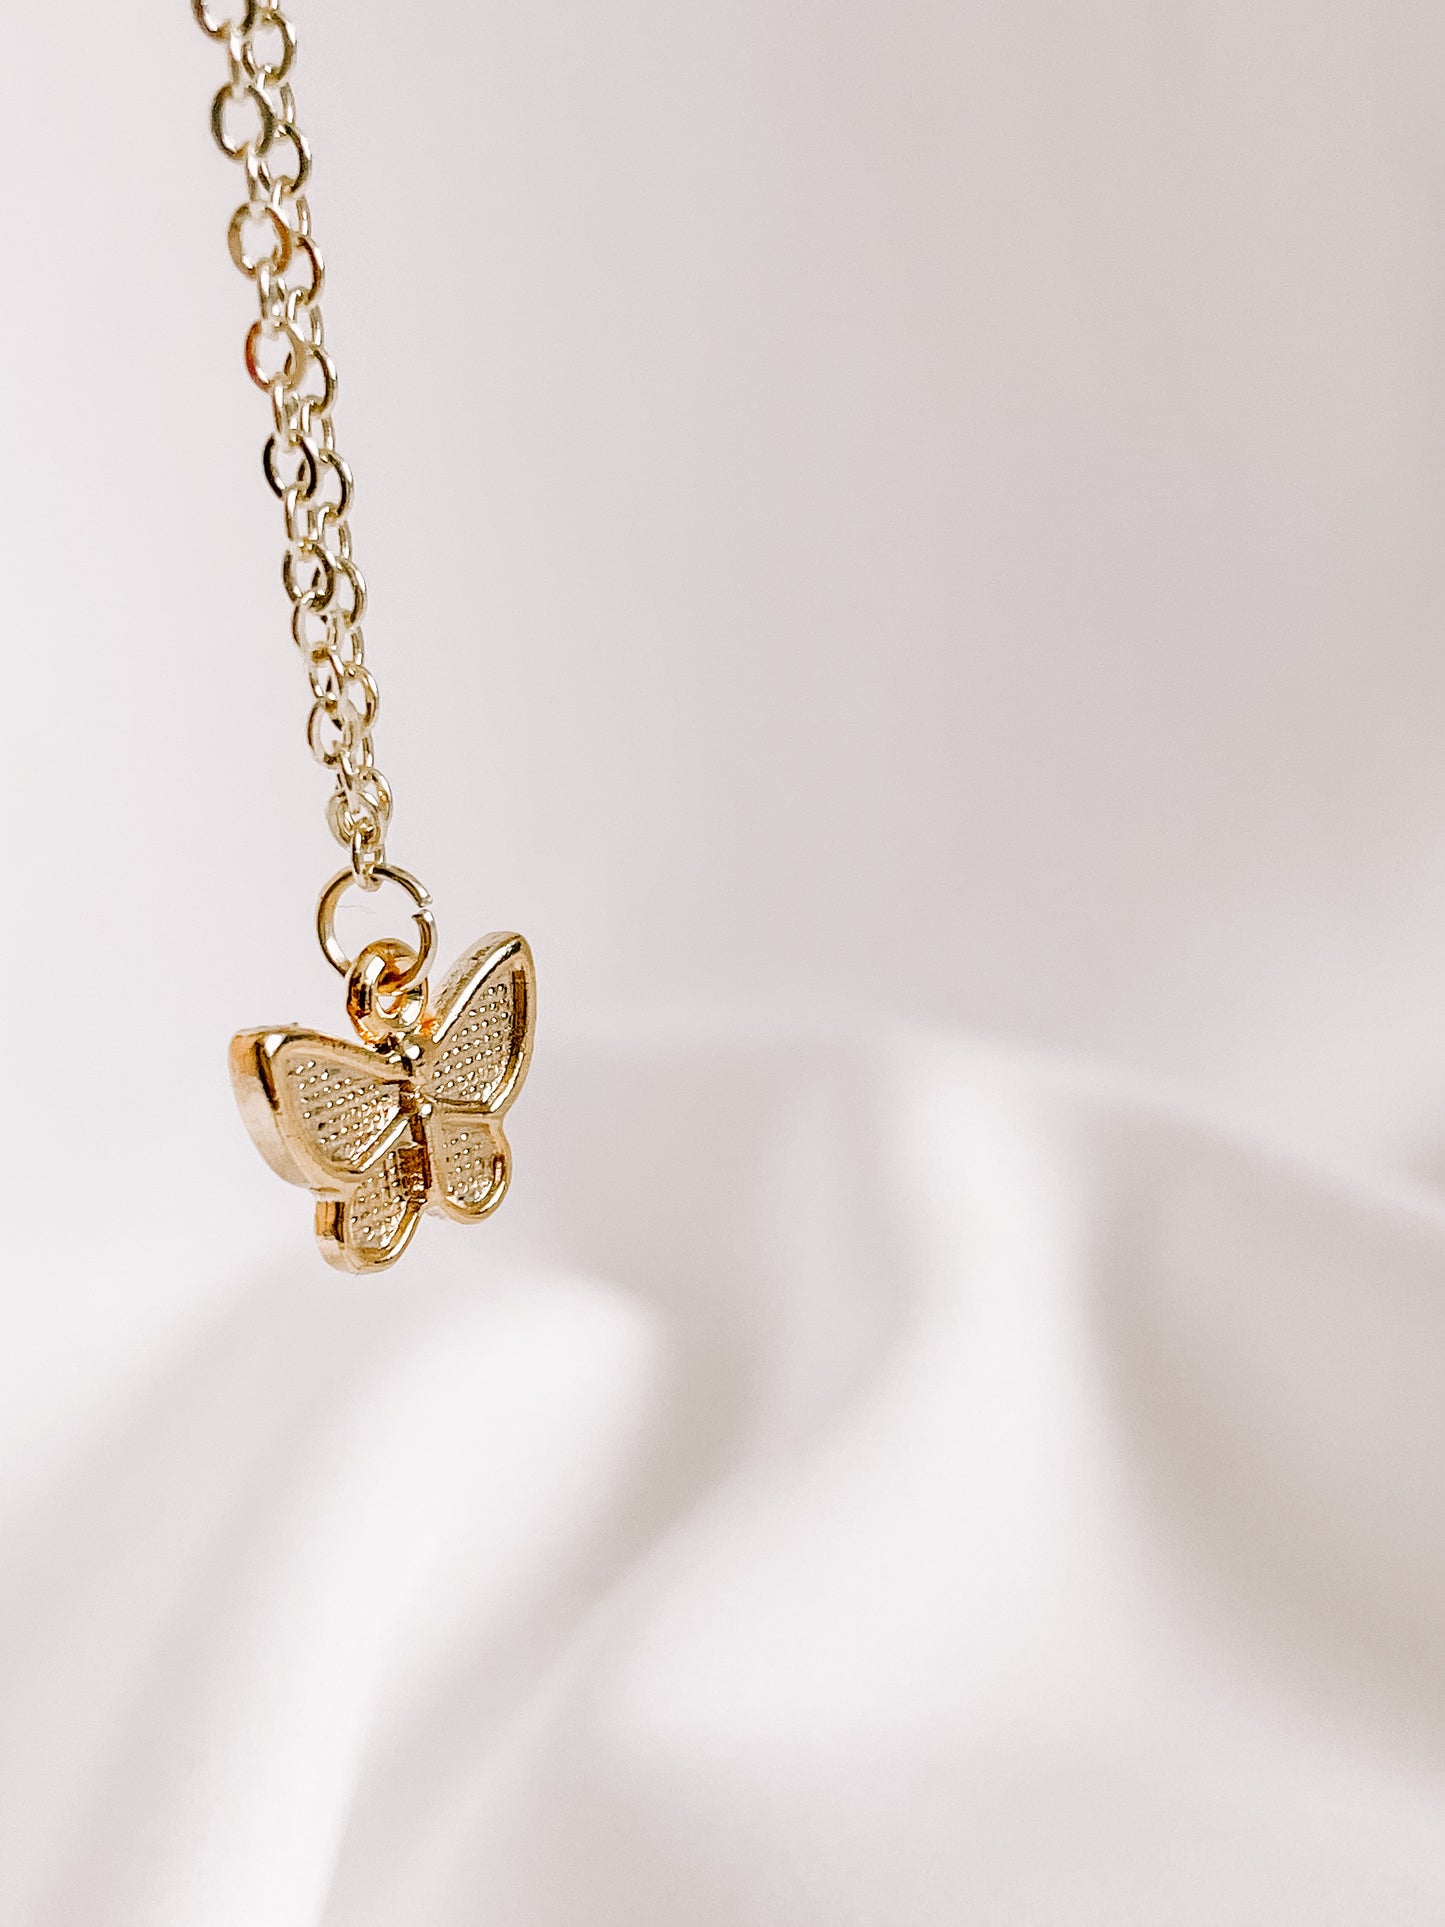 24k gold butterfly charm necklace